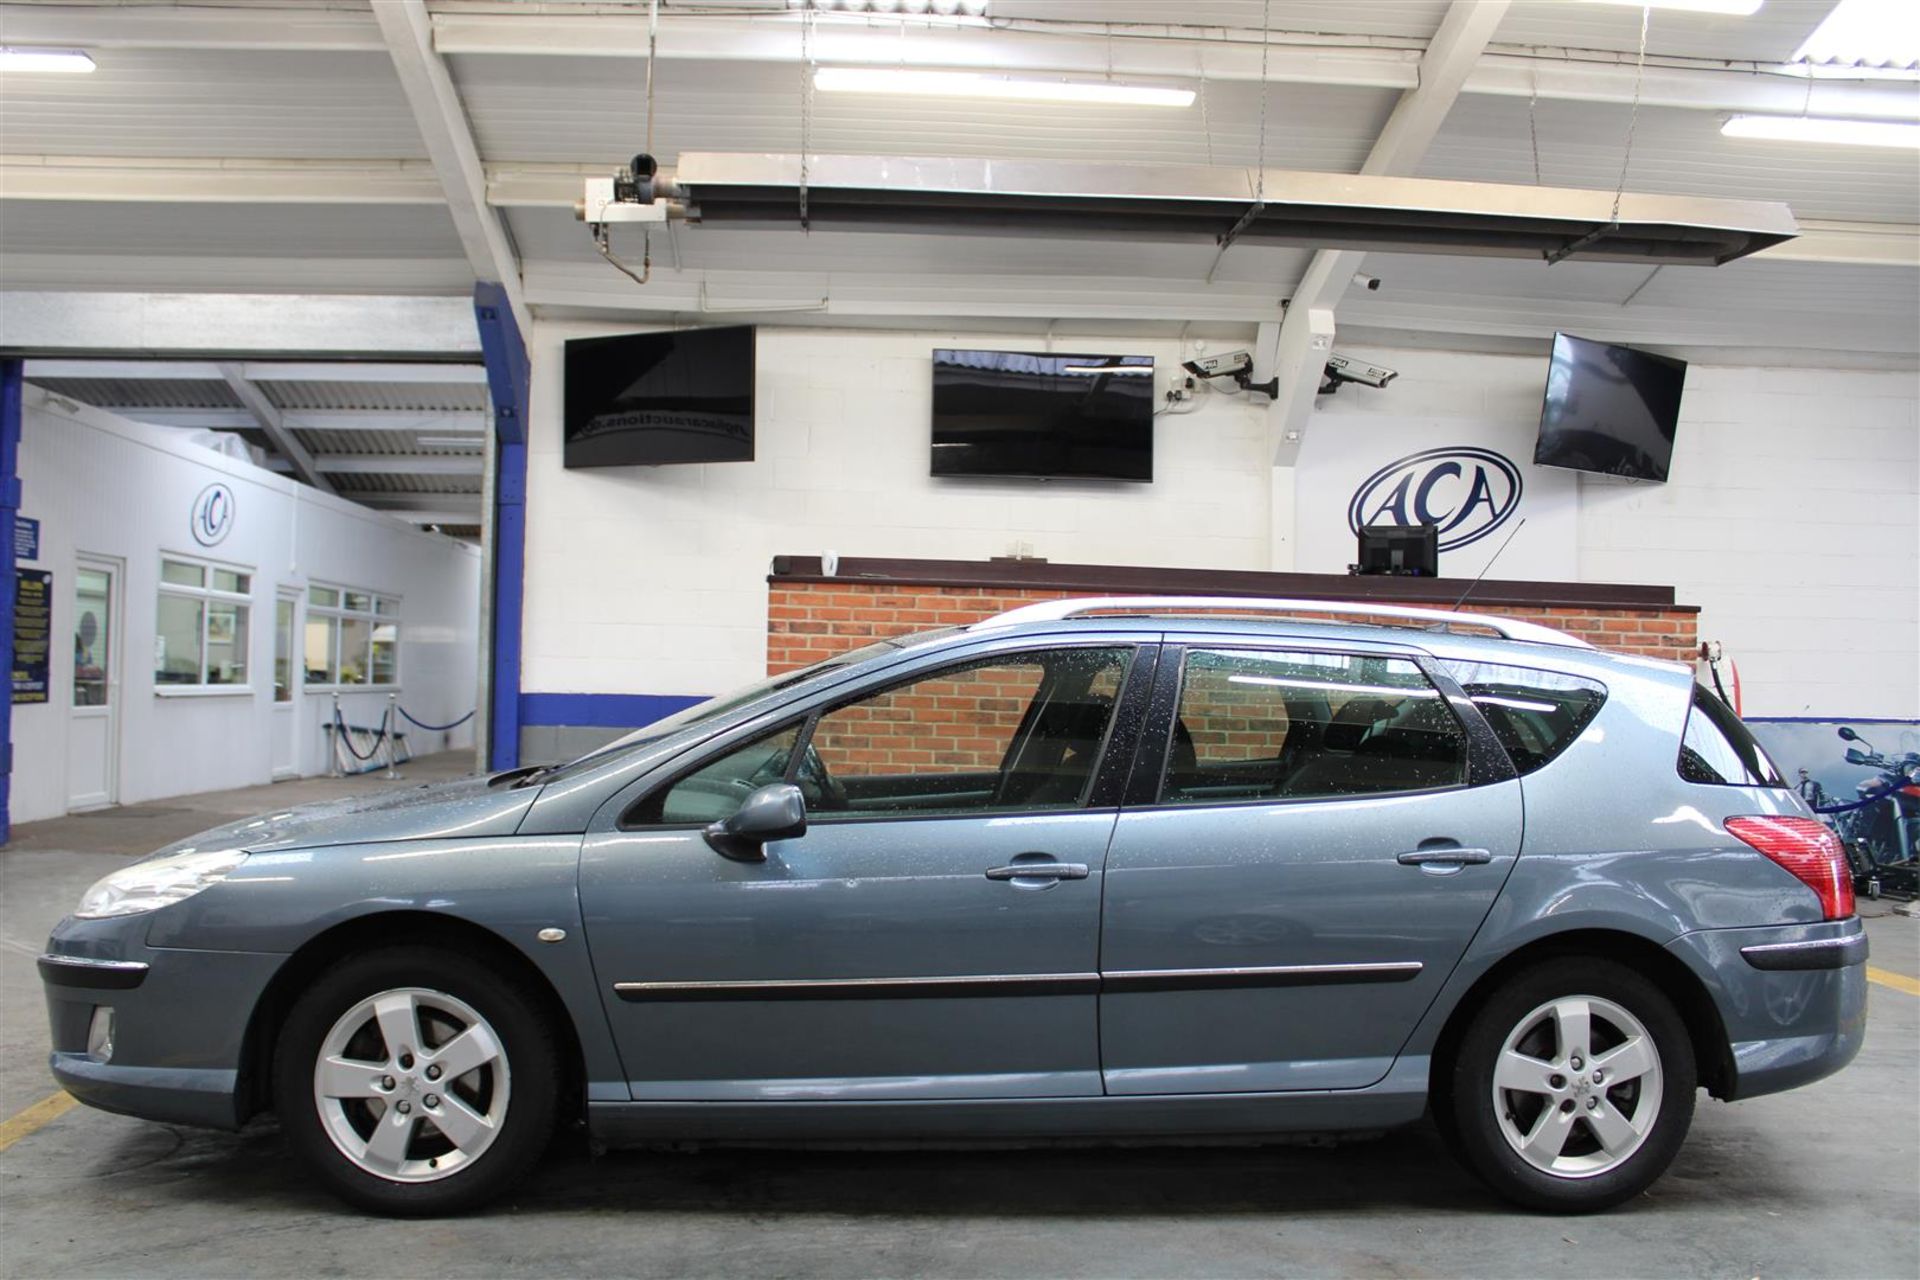 57 08 Peugeot 407 SW SE HDI - Image 32 of 32